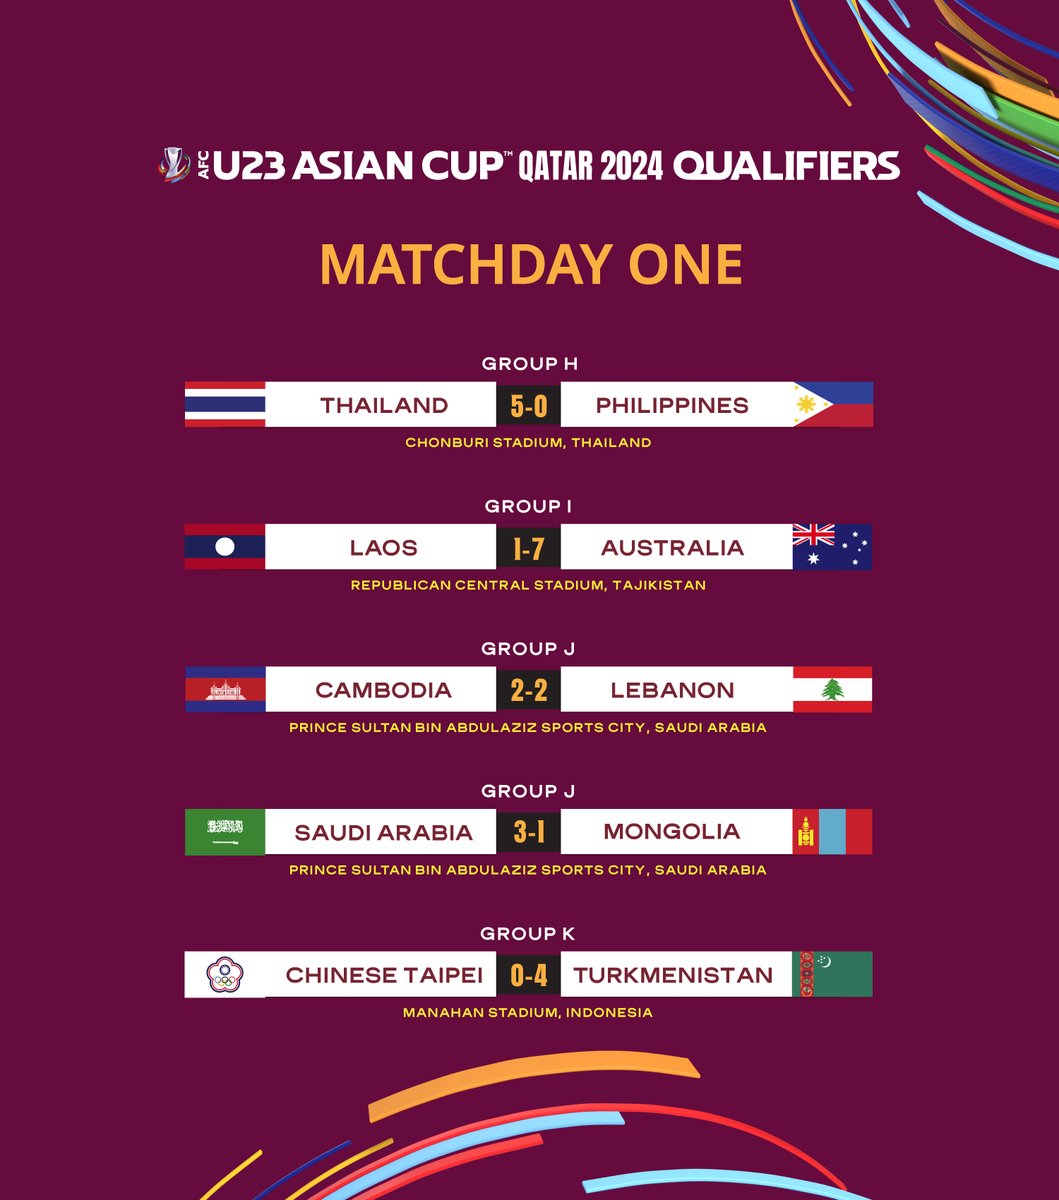 AsianCup2023 on X: 𝐓𝐡𝐞 𝐑𝐨𝐚𝐝 𝐓𝐨 #AsianCup2027 𝐚𝐧𝐝 #FIFAWorldCup  𝐂𝐨𝐧𝐭𝐢𝐧𝐮𝐞𝐬! 9️⃣ group winners and 9️⃣ runners up will automatically  qualify for 2027 🇸🇦Saudi Arabia and continue their passage into the  #AsianQualifiers Final